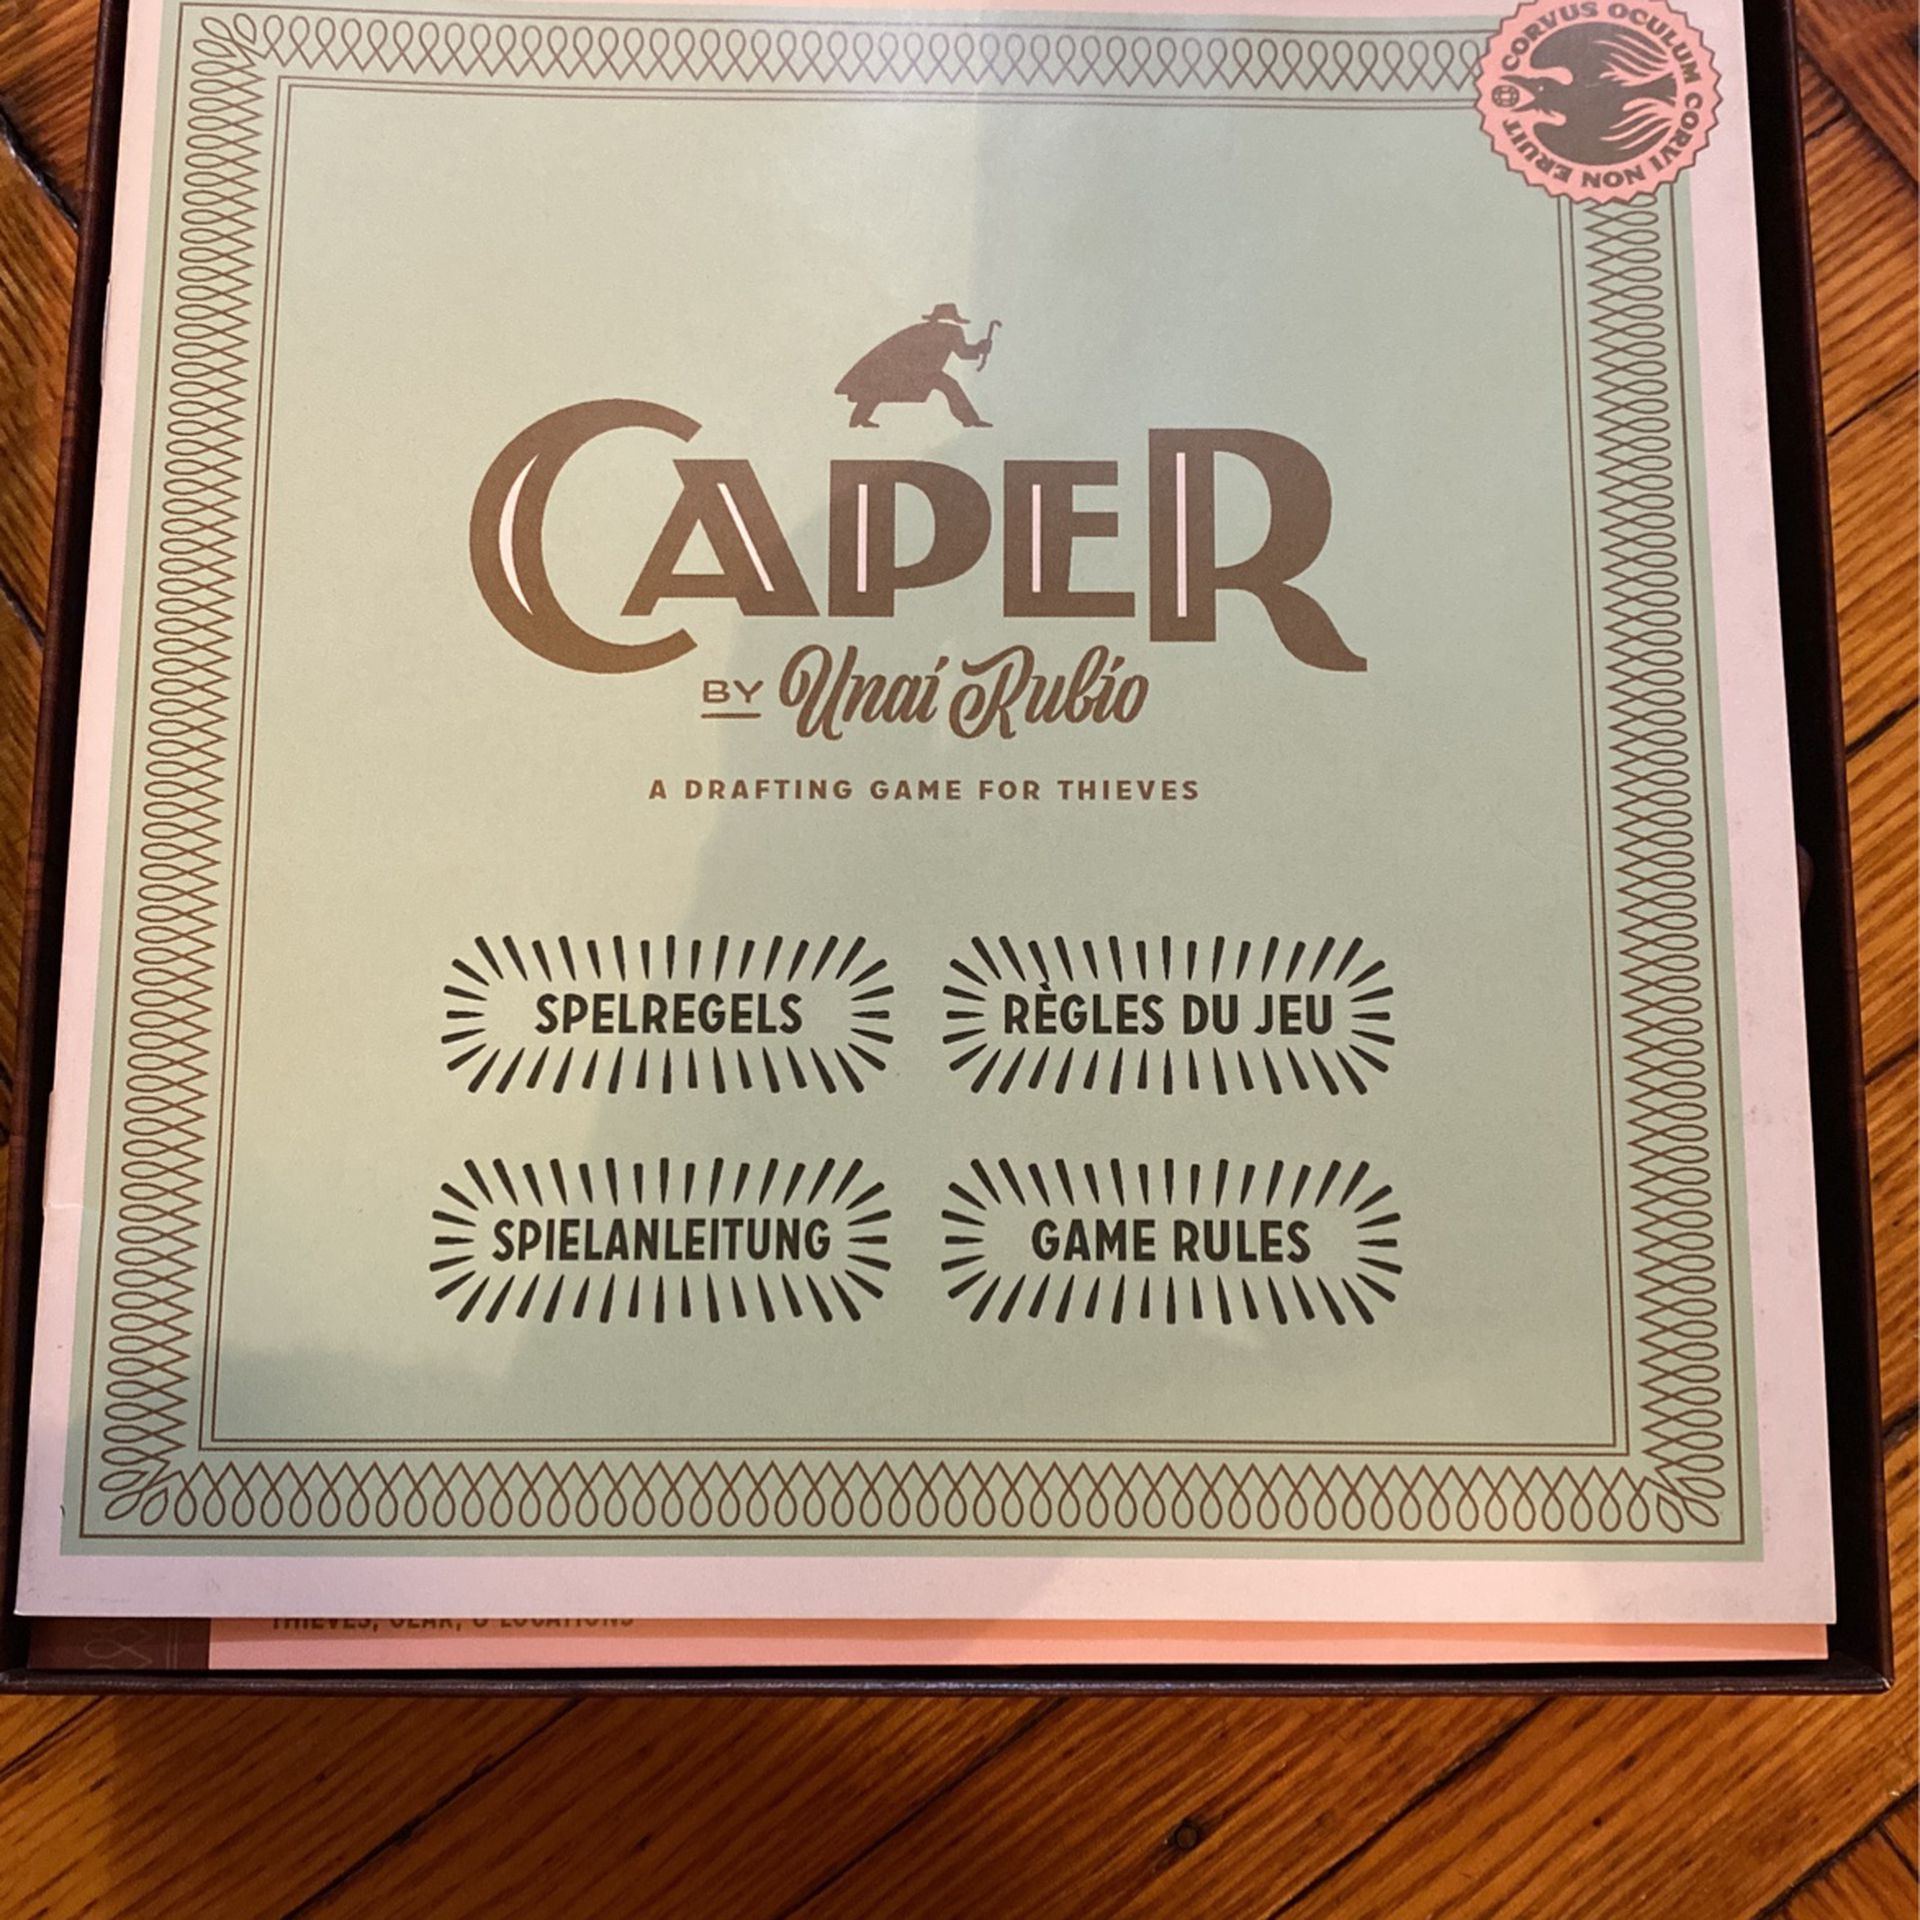 Caper, A Drafting Game For Thieves